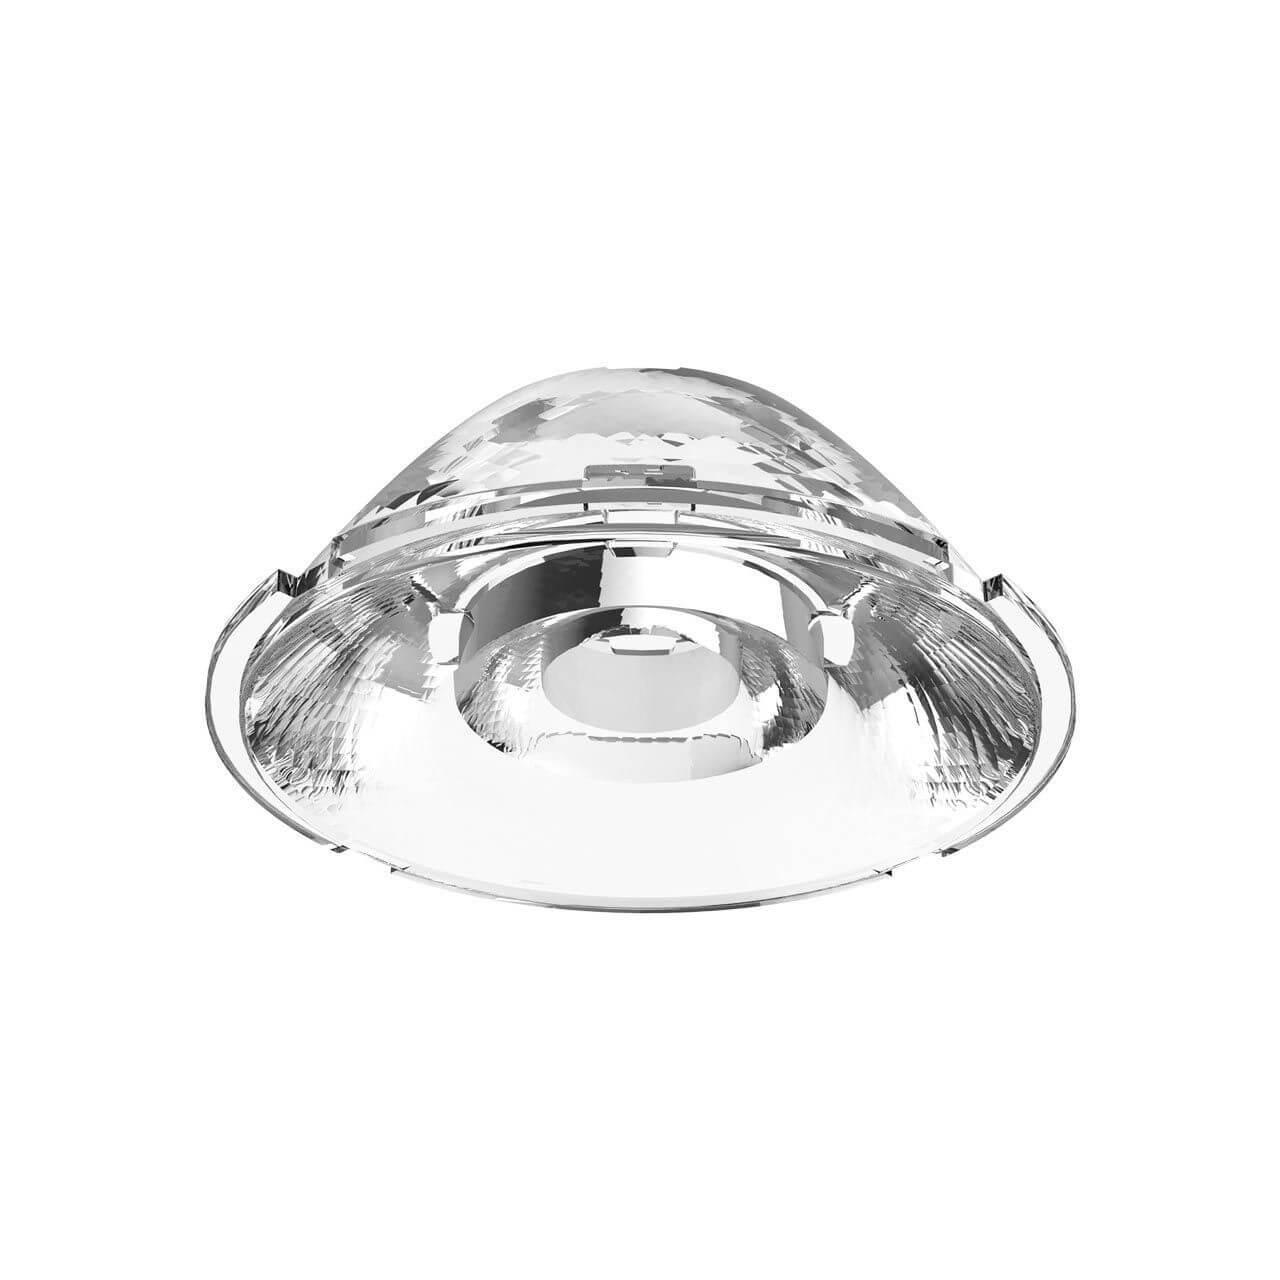   Ideal Lux Quick 15W / 21W Lens 15 222592